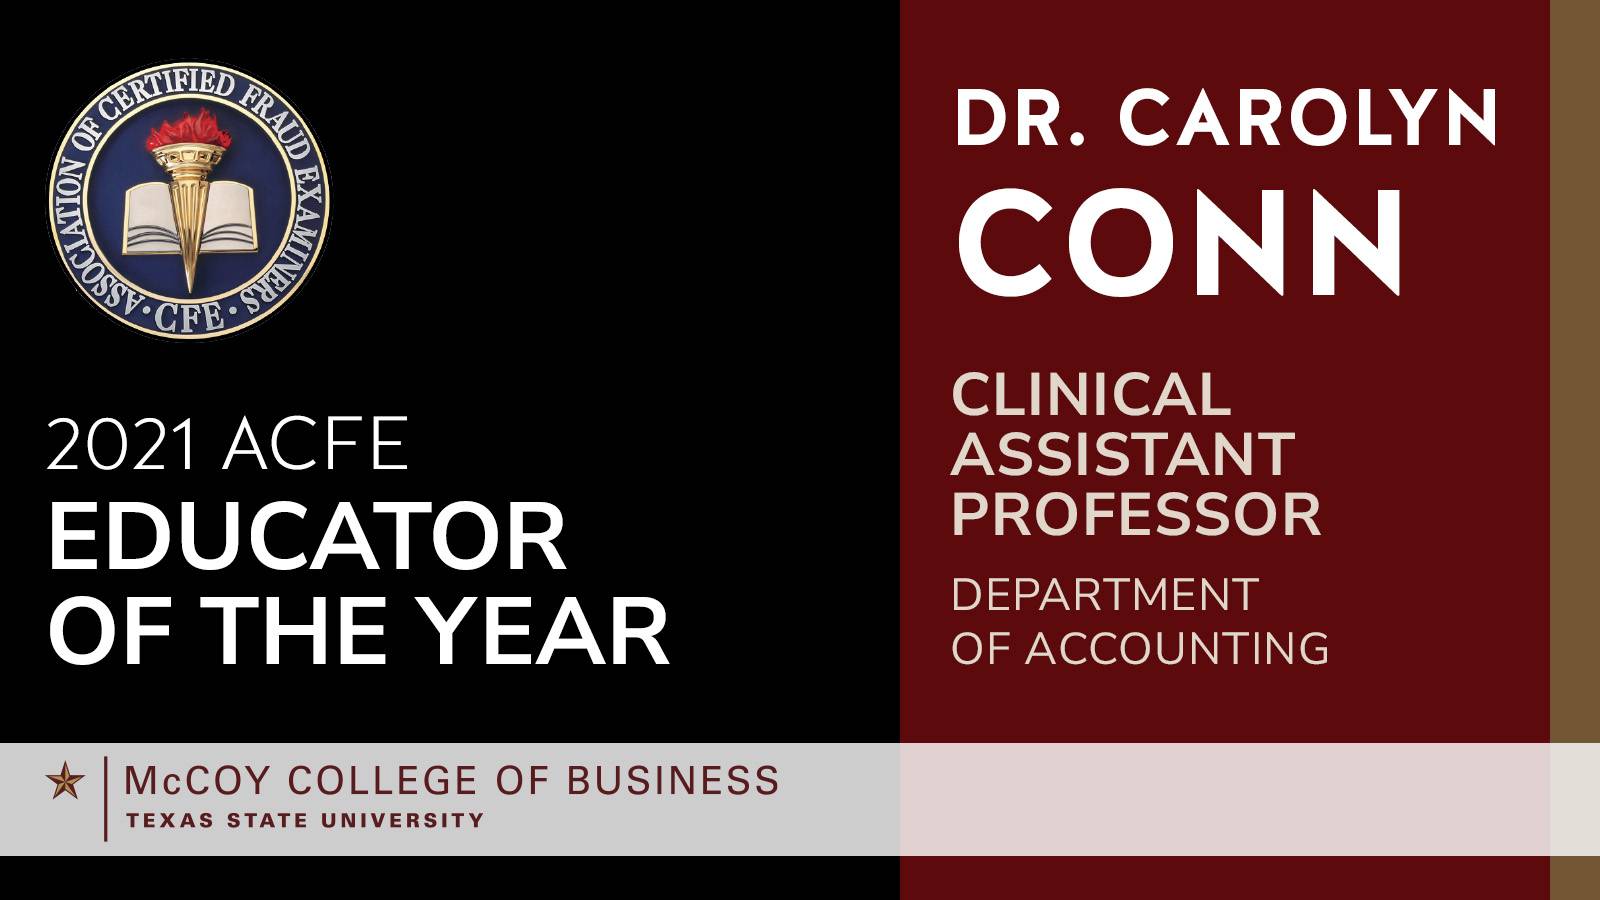 Graphic with overlay of McCoy College of Business logo and text: "2021 ACFE Educator of the Year: Dr. Carolyn Conn, Clinical Assistant Professor, Department of Accounting"